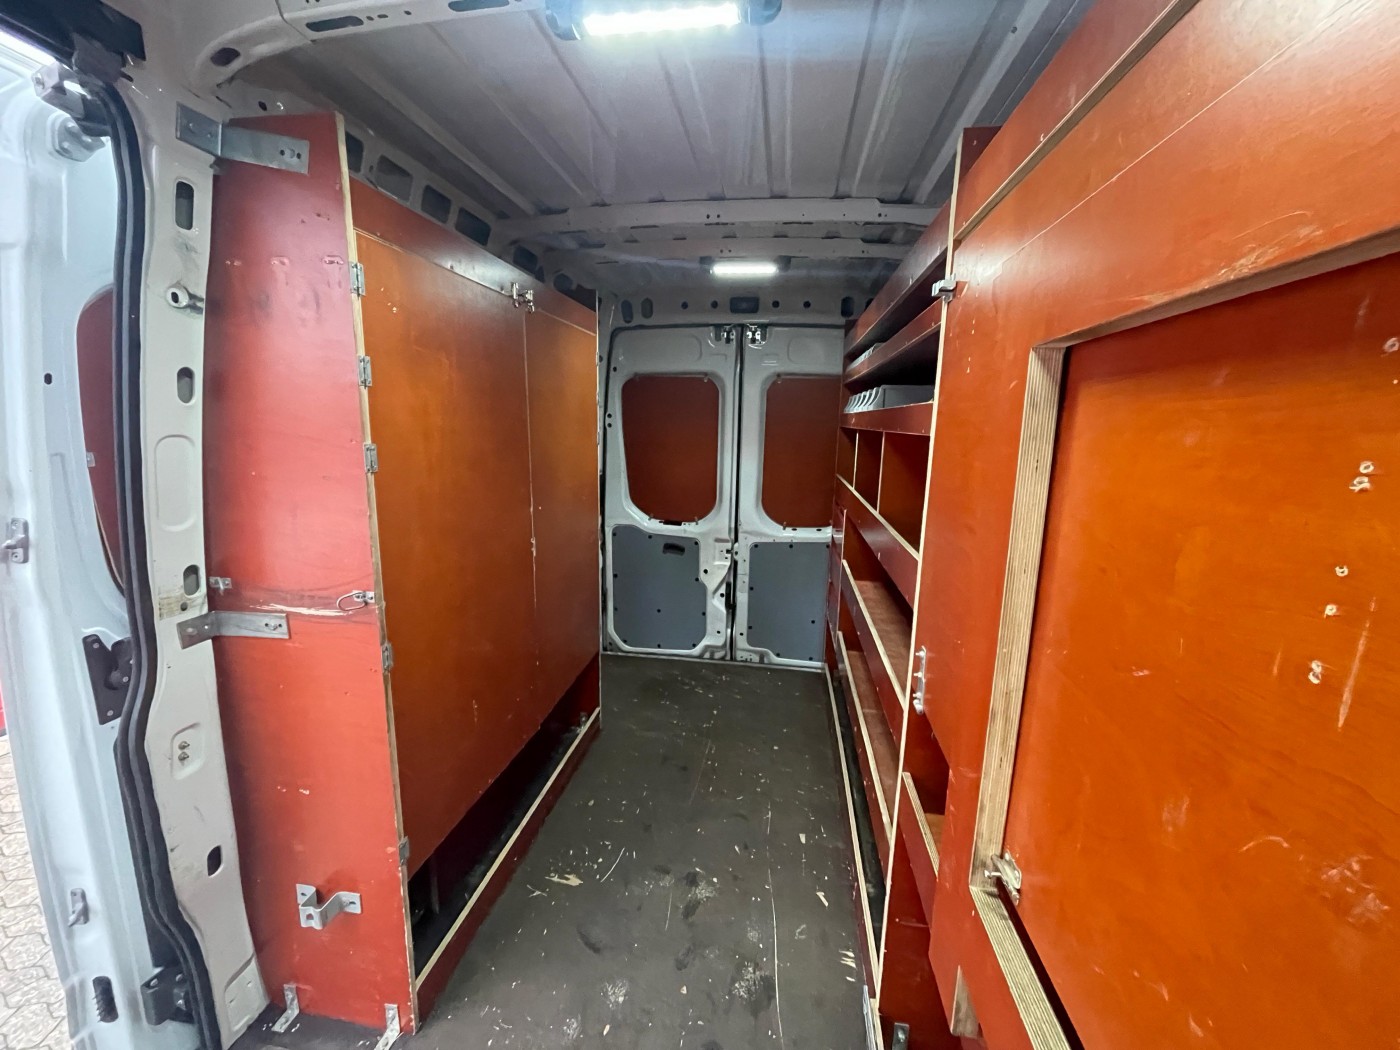 Iveco Daily 35S14 L2H2 Mobile Workshop 